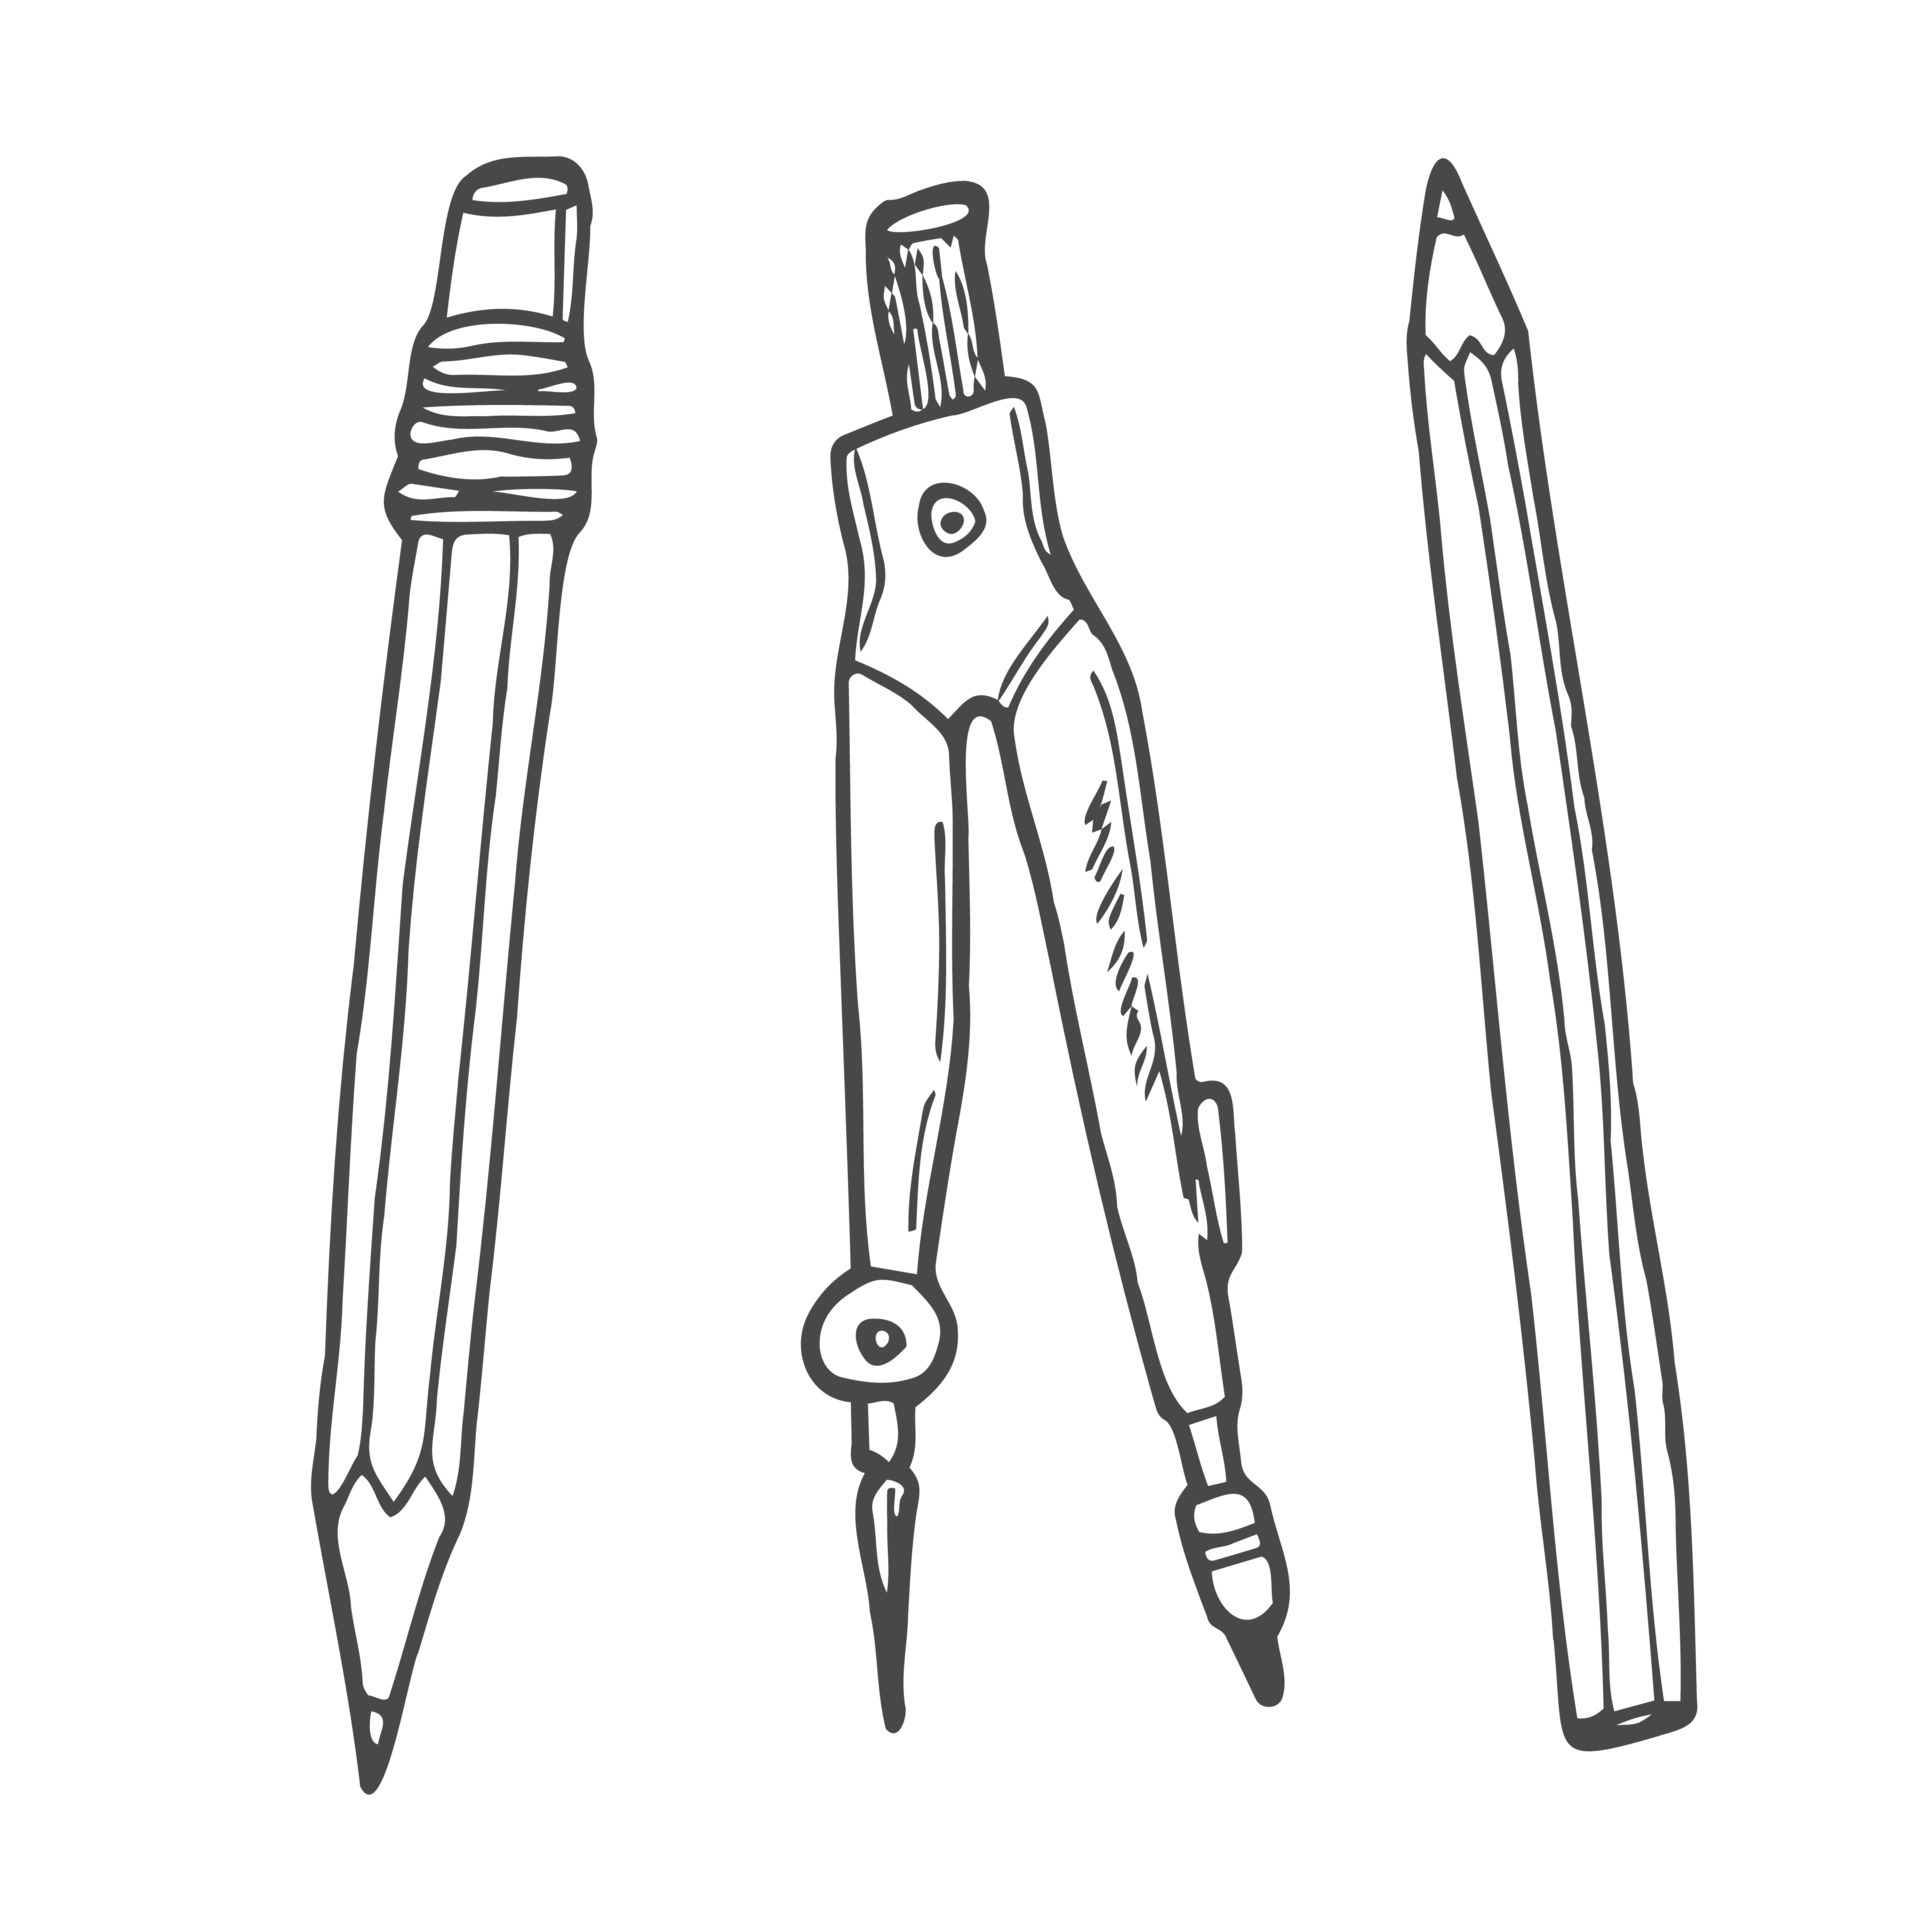 https://static.vecteezy.com/system/resources/previews/024/202/858/original/stationary-hand-drawn-doodle-illustrations-set-style-sketch-with-compass-pen-and-pencil-isolated-vector.jpg